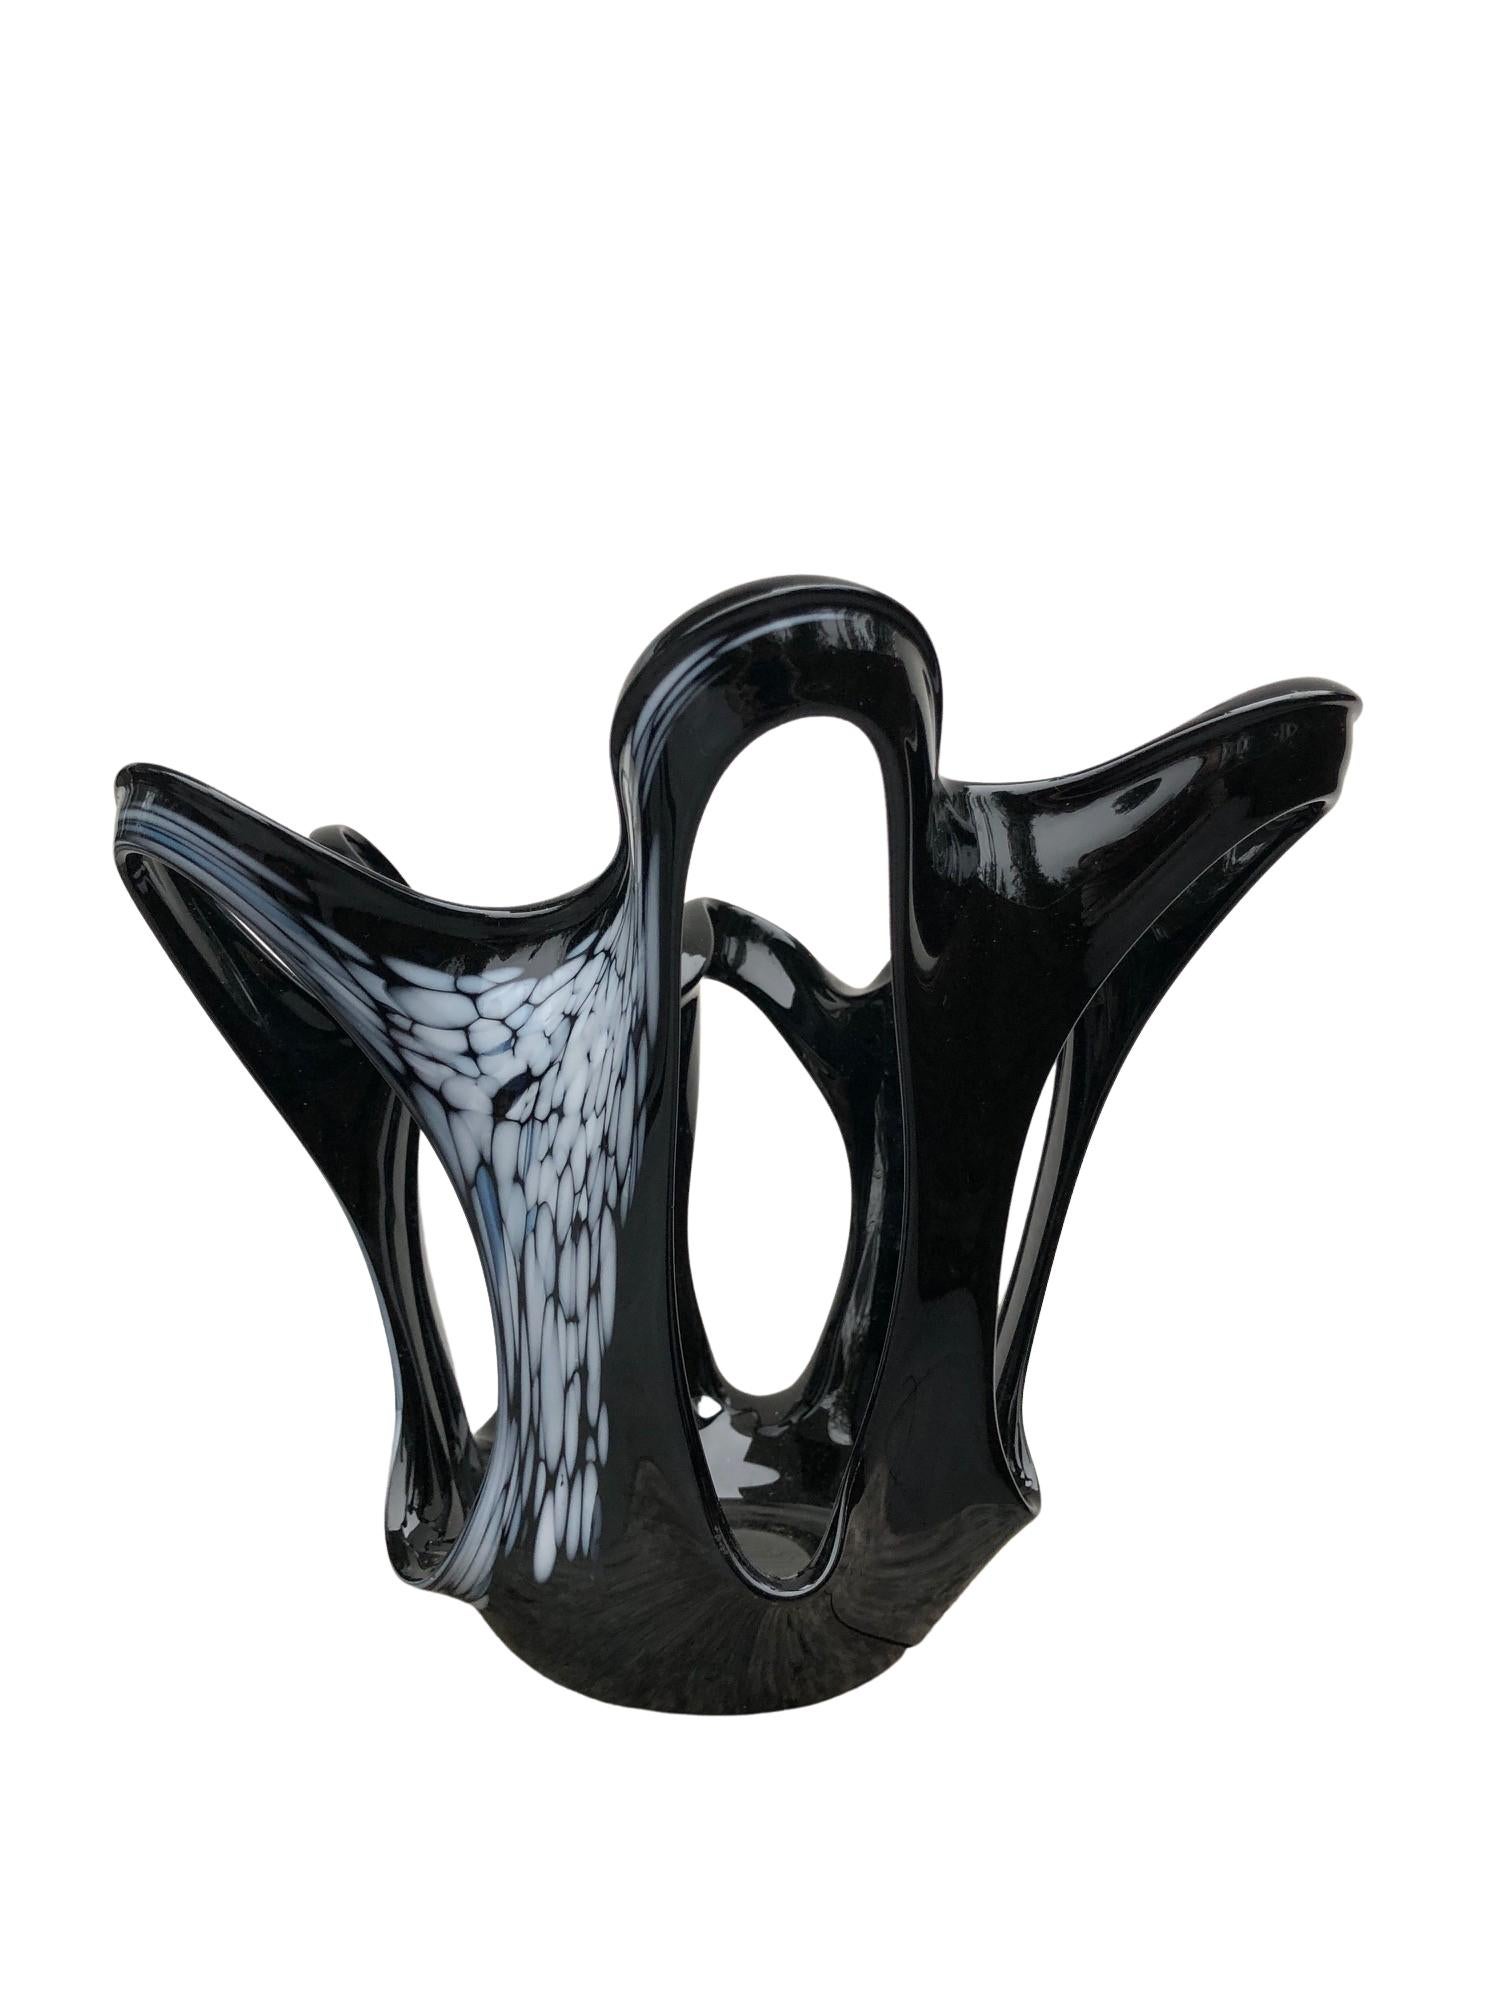 Hand-Crafted Mid-Century Black Vase in Organic Shape, Europe, 1960s For Sale